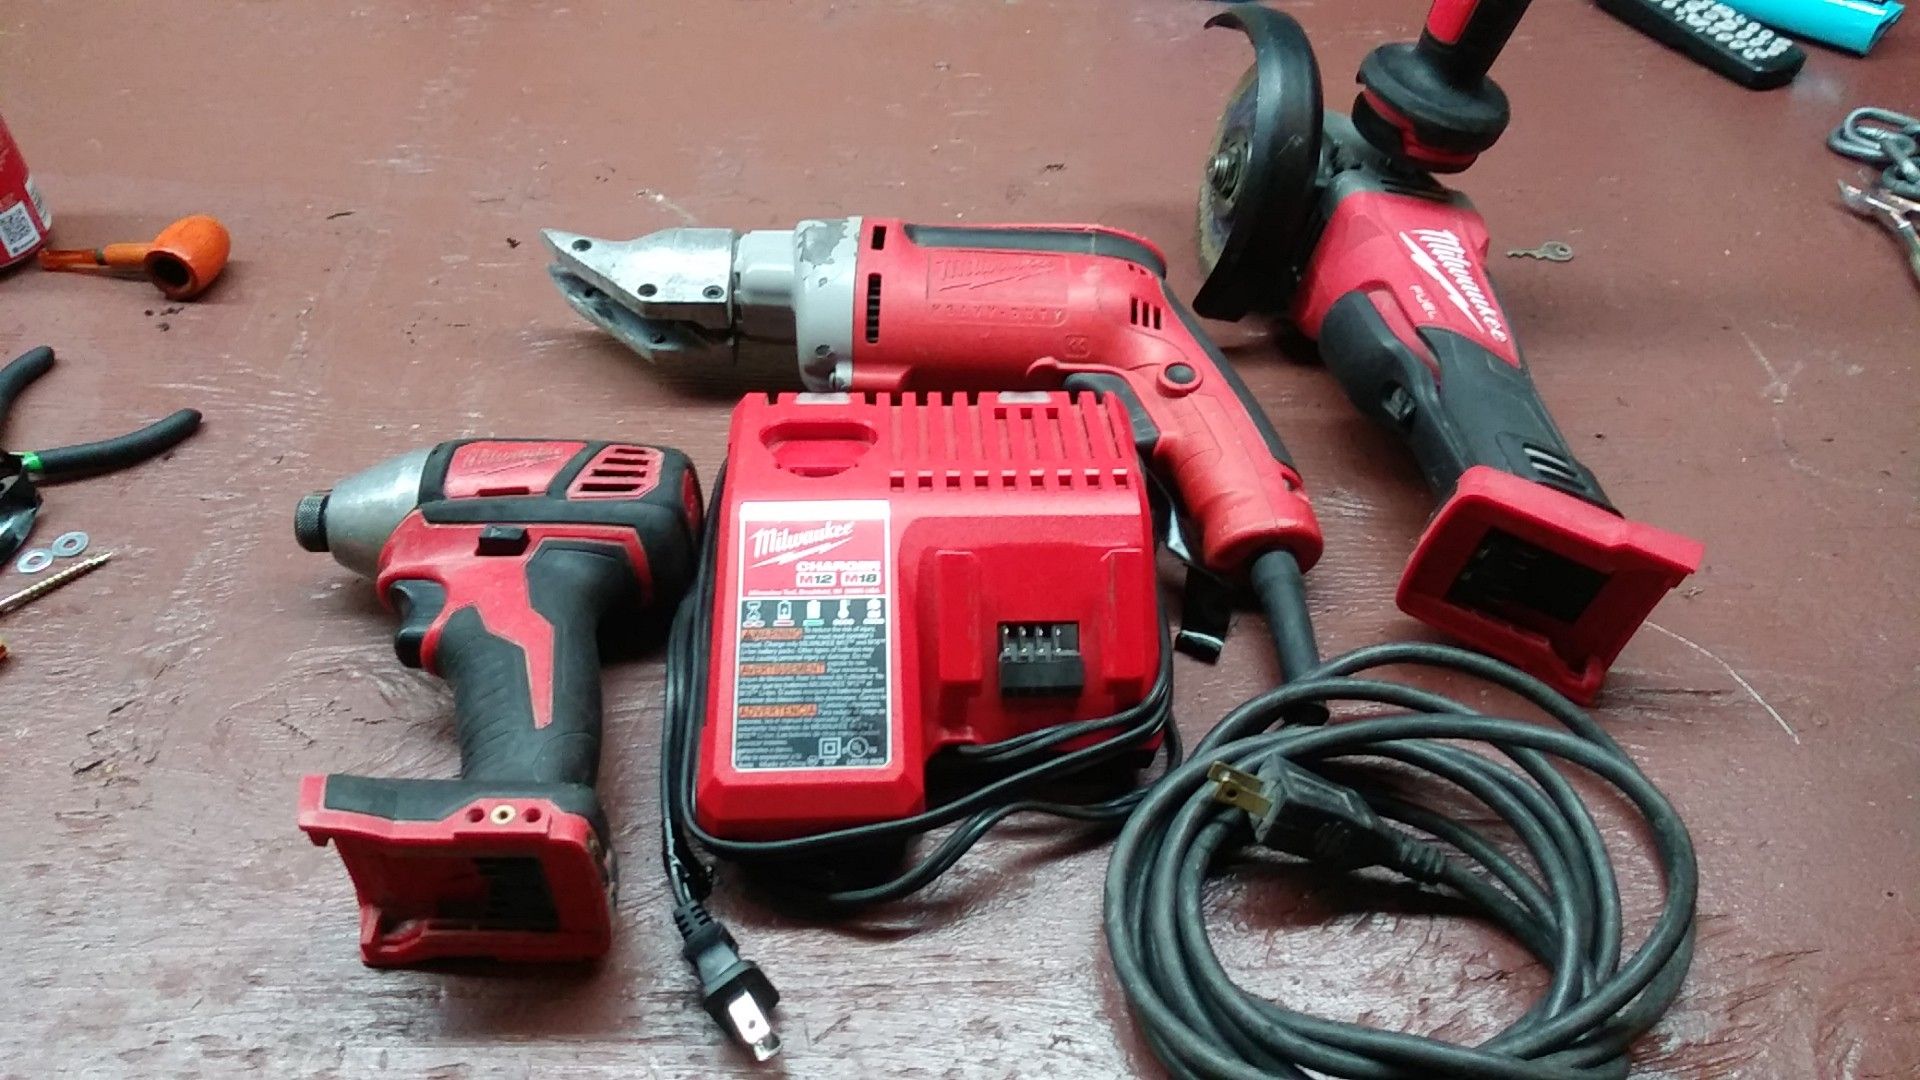 Milwaukee impact drill milwaukee grinder charger m12 m18 milwaukee sheer but sheer is missing cutting attachments